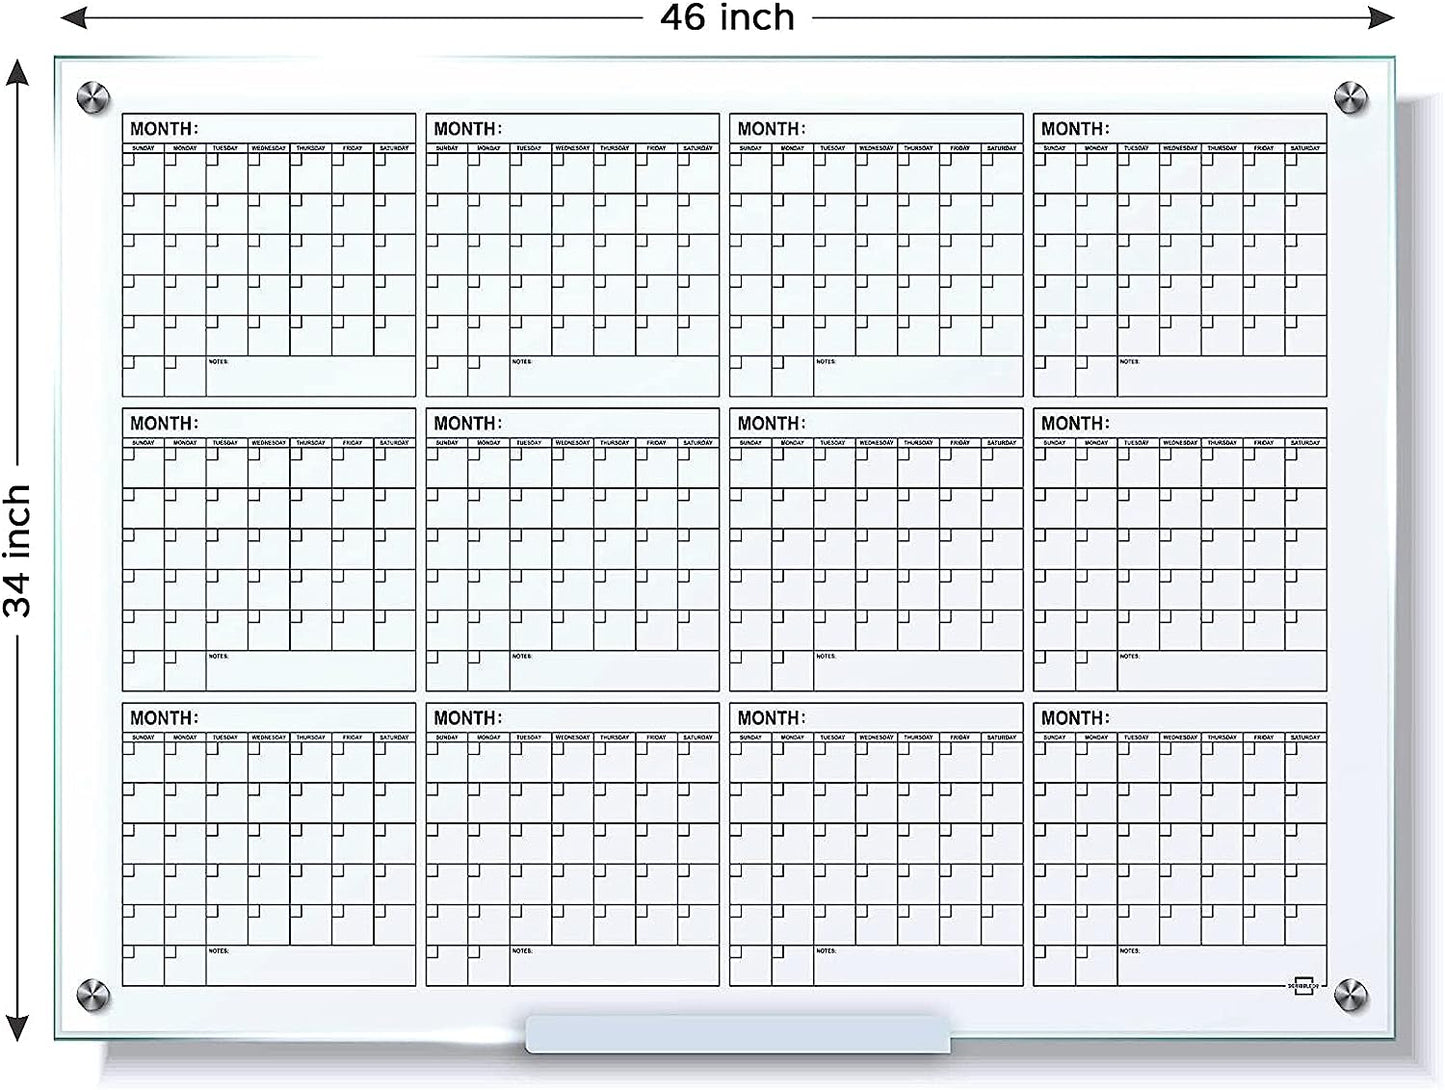 34x46 glass yearly wall calendar for schools